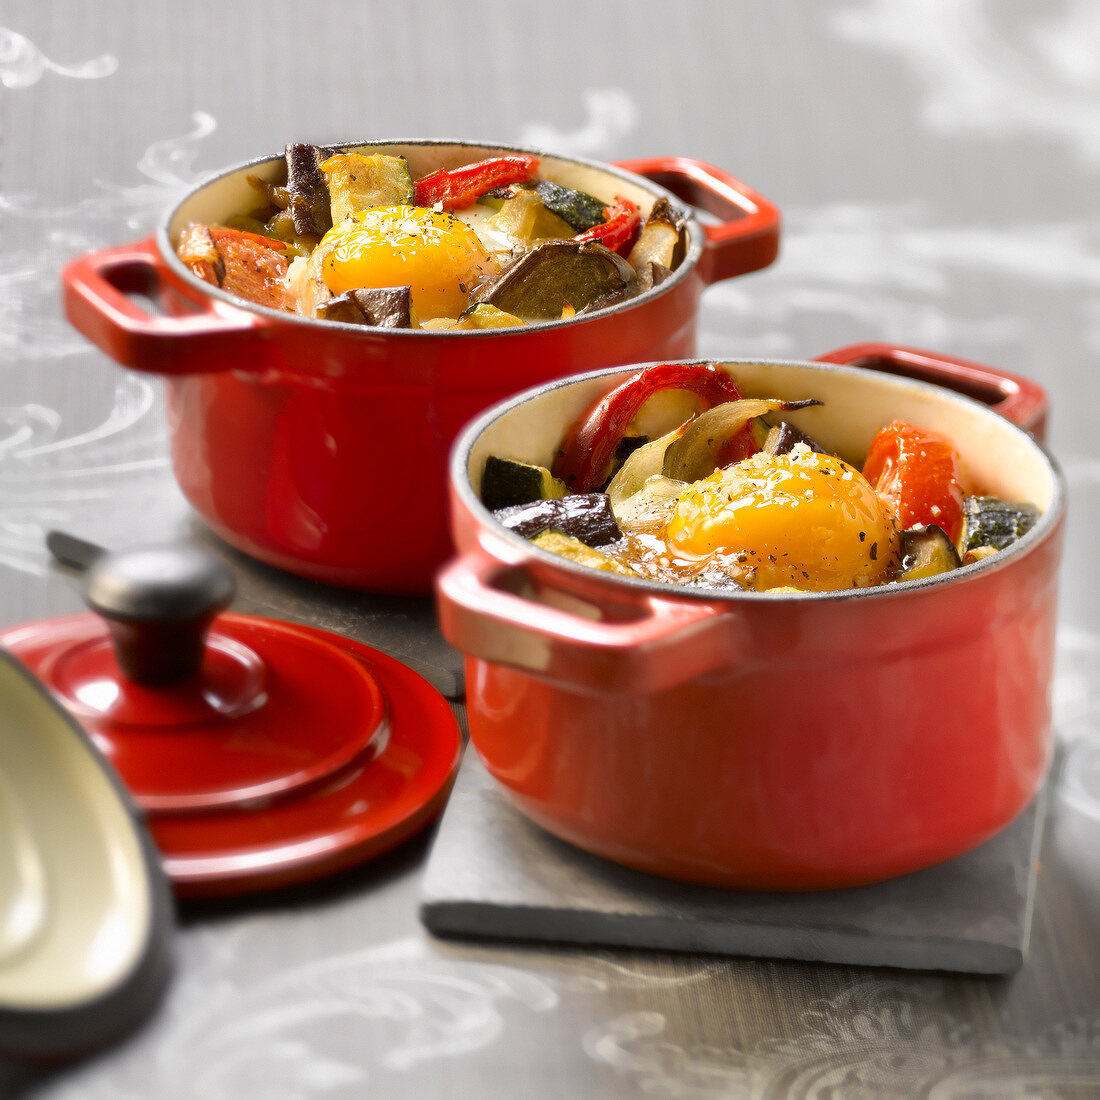 Small casserole dish of ratatouille with an egg